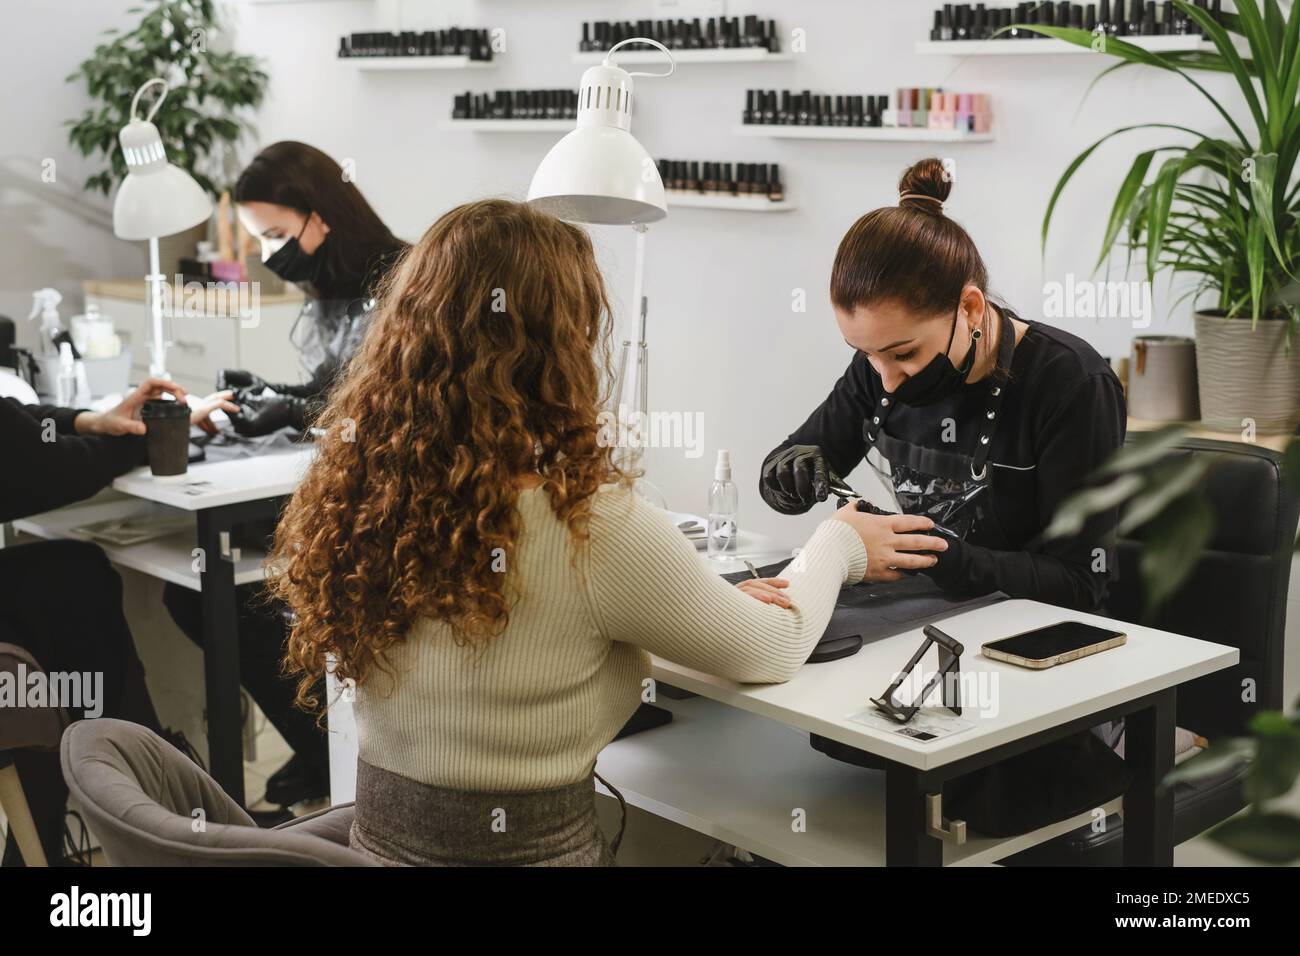 Doing manicure in salon. Female manicurist working on client nails in professional salon. Occupation concept. Customers at beauty green modern studio  Stock Photo